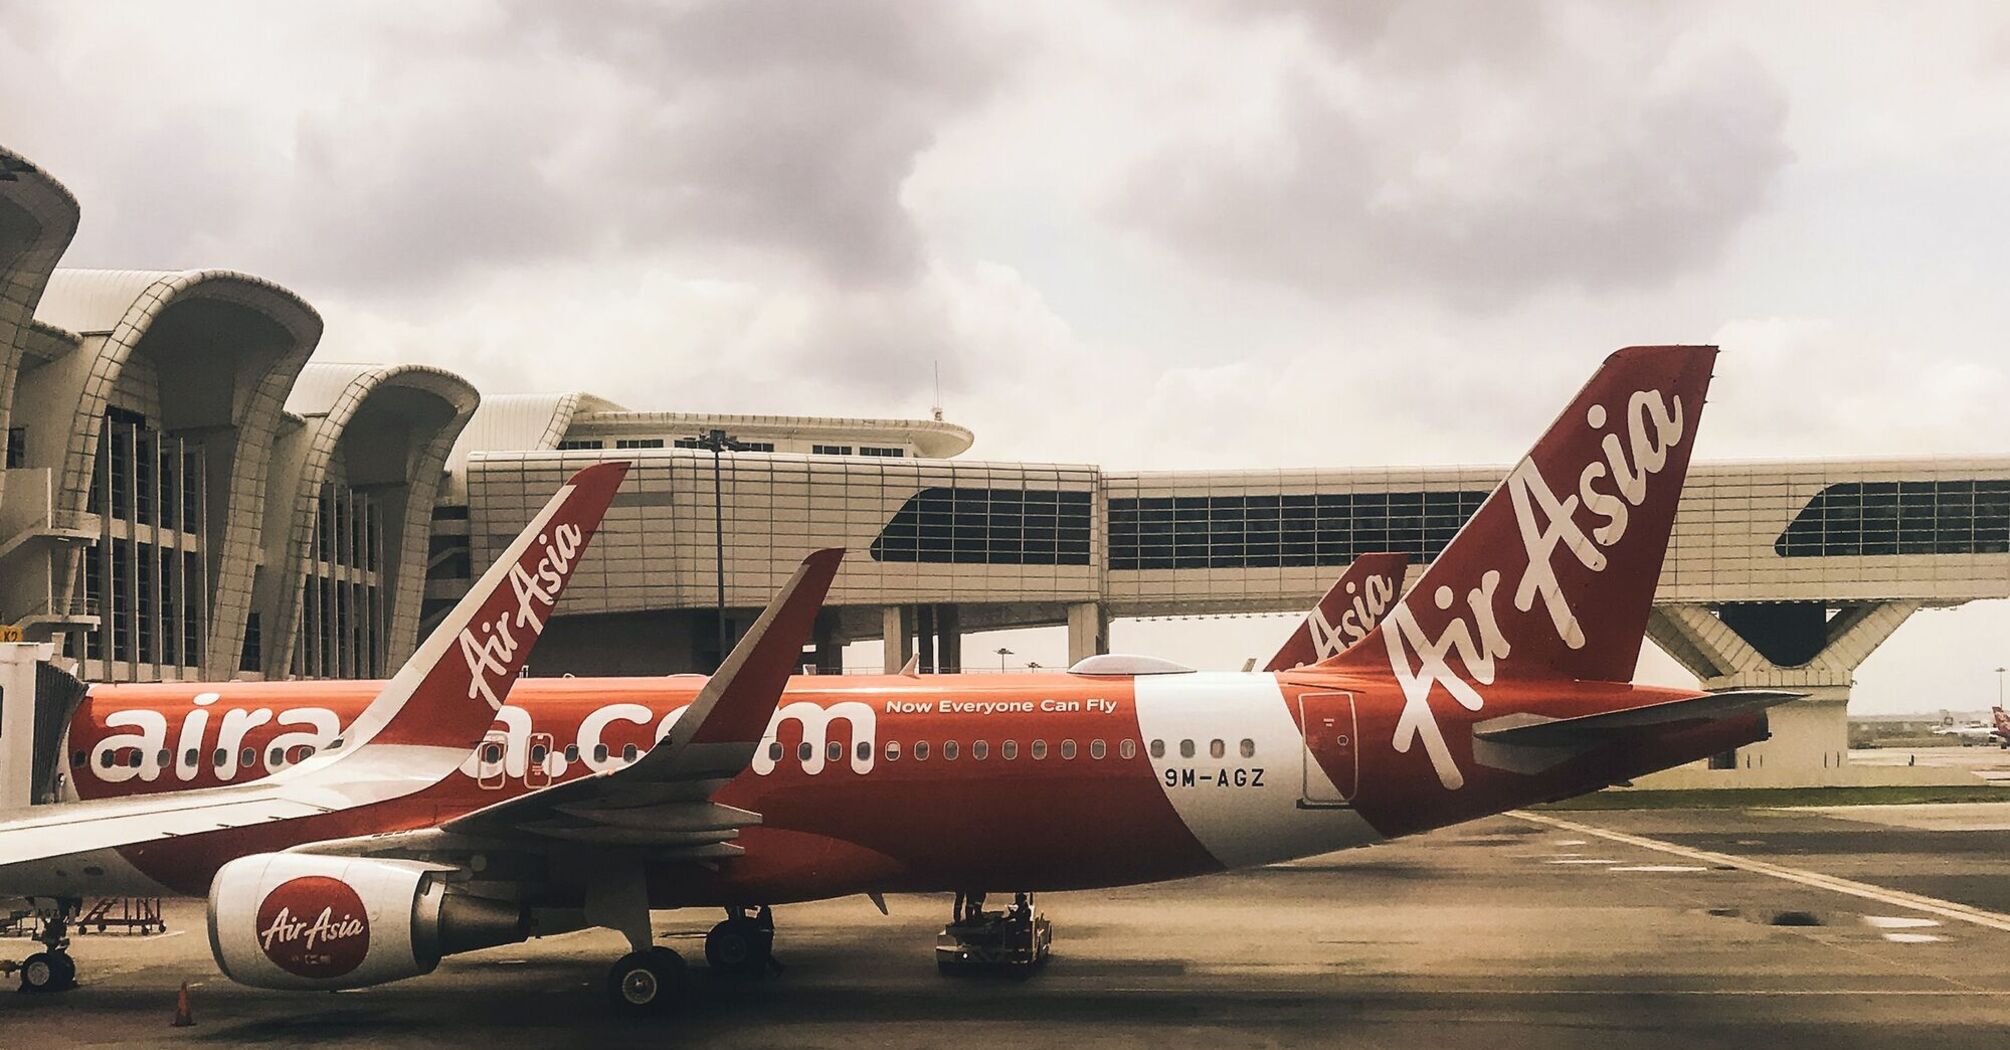 AirAsia planes at the airport